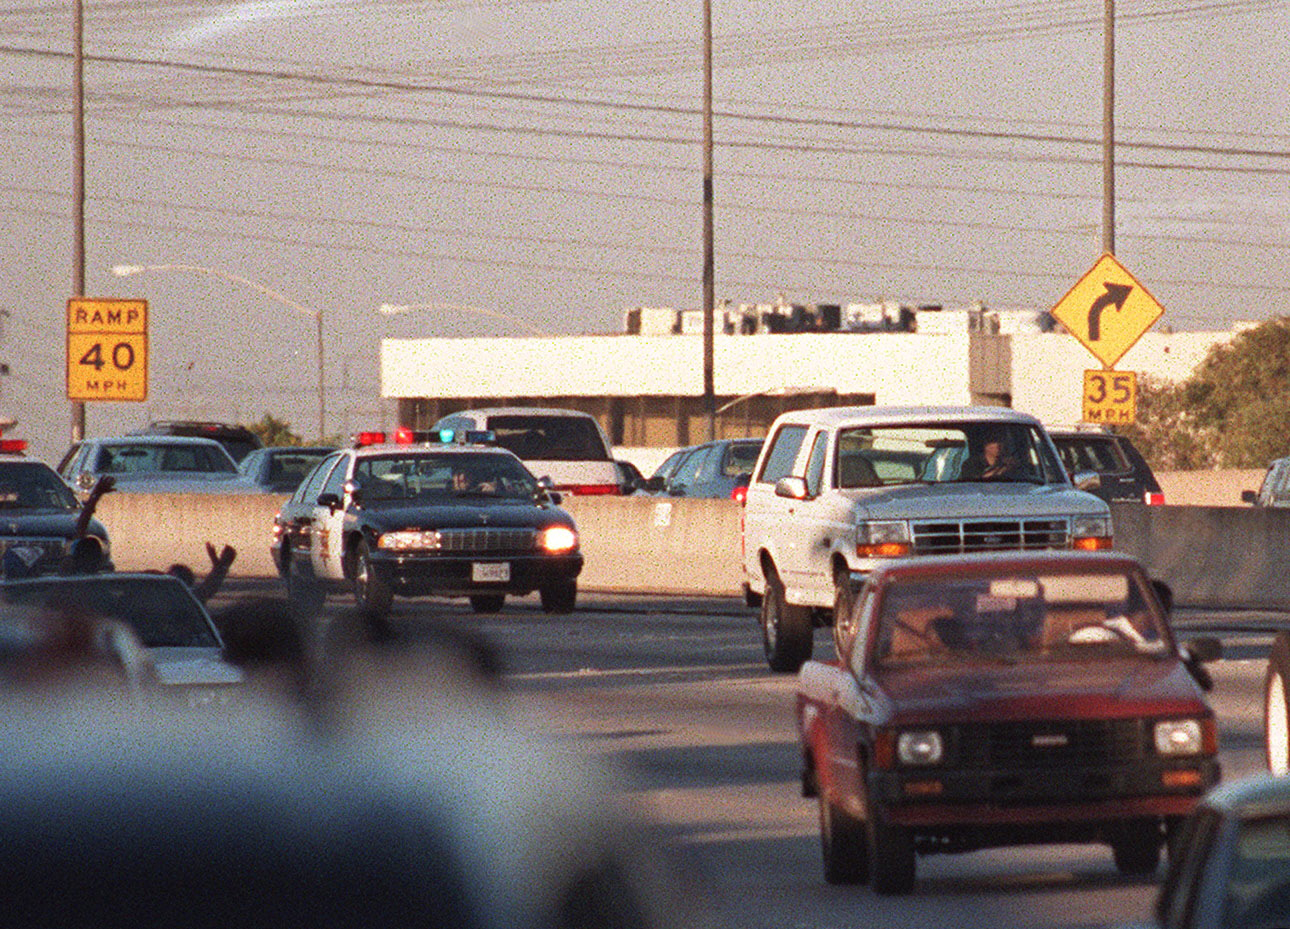 Police cars pursue the white Ford Bronco driven by Al Cowlings, carrying O.J. Simpson on June 17, 1994 on the 405 freeway in Los Angeles.